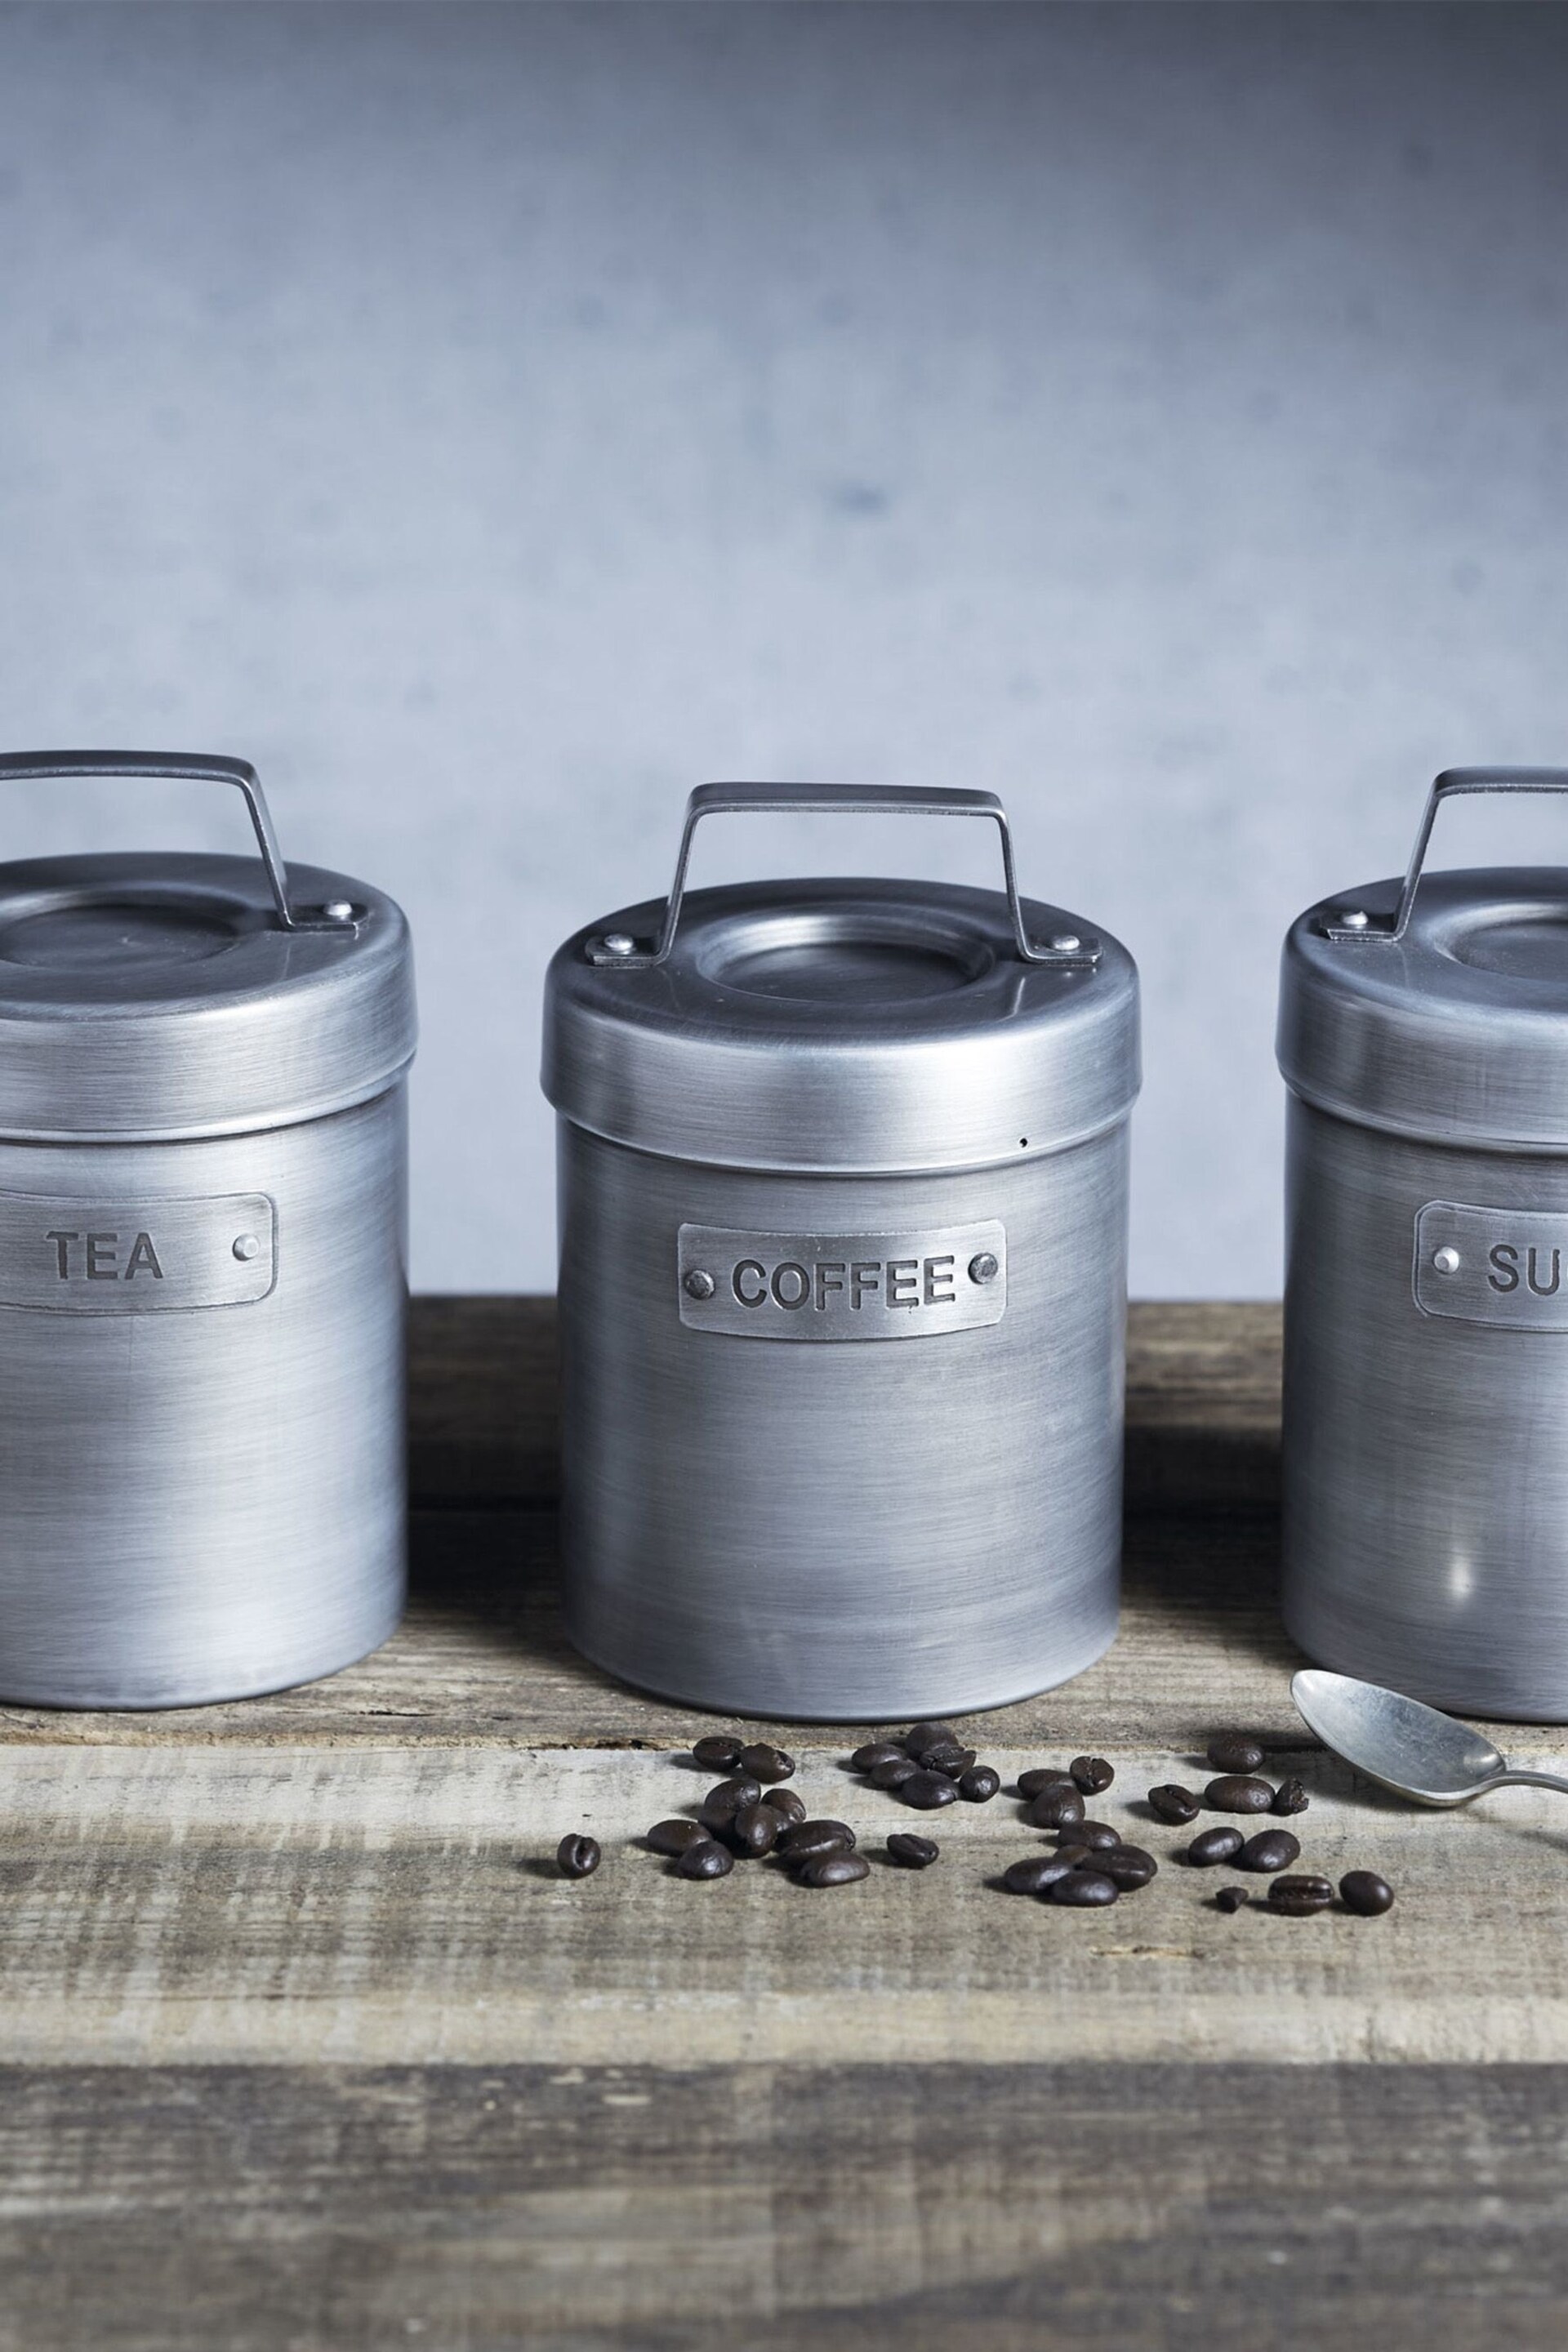 Industrial Kitchen Grey Sugar Canister - Image 1 of 3